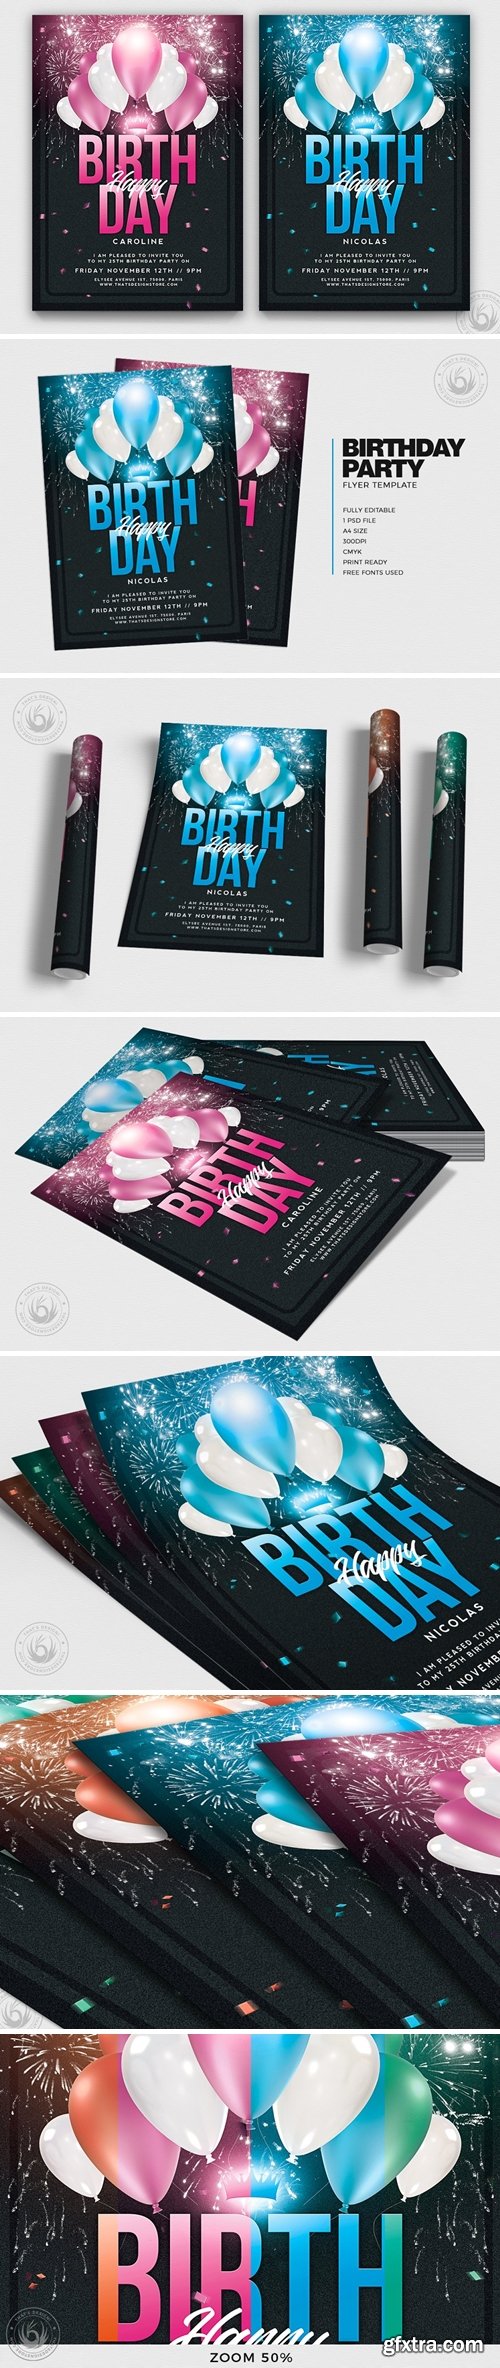 CM - Birthday Party Flyer Template 3752670